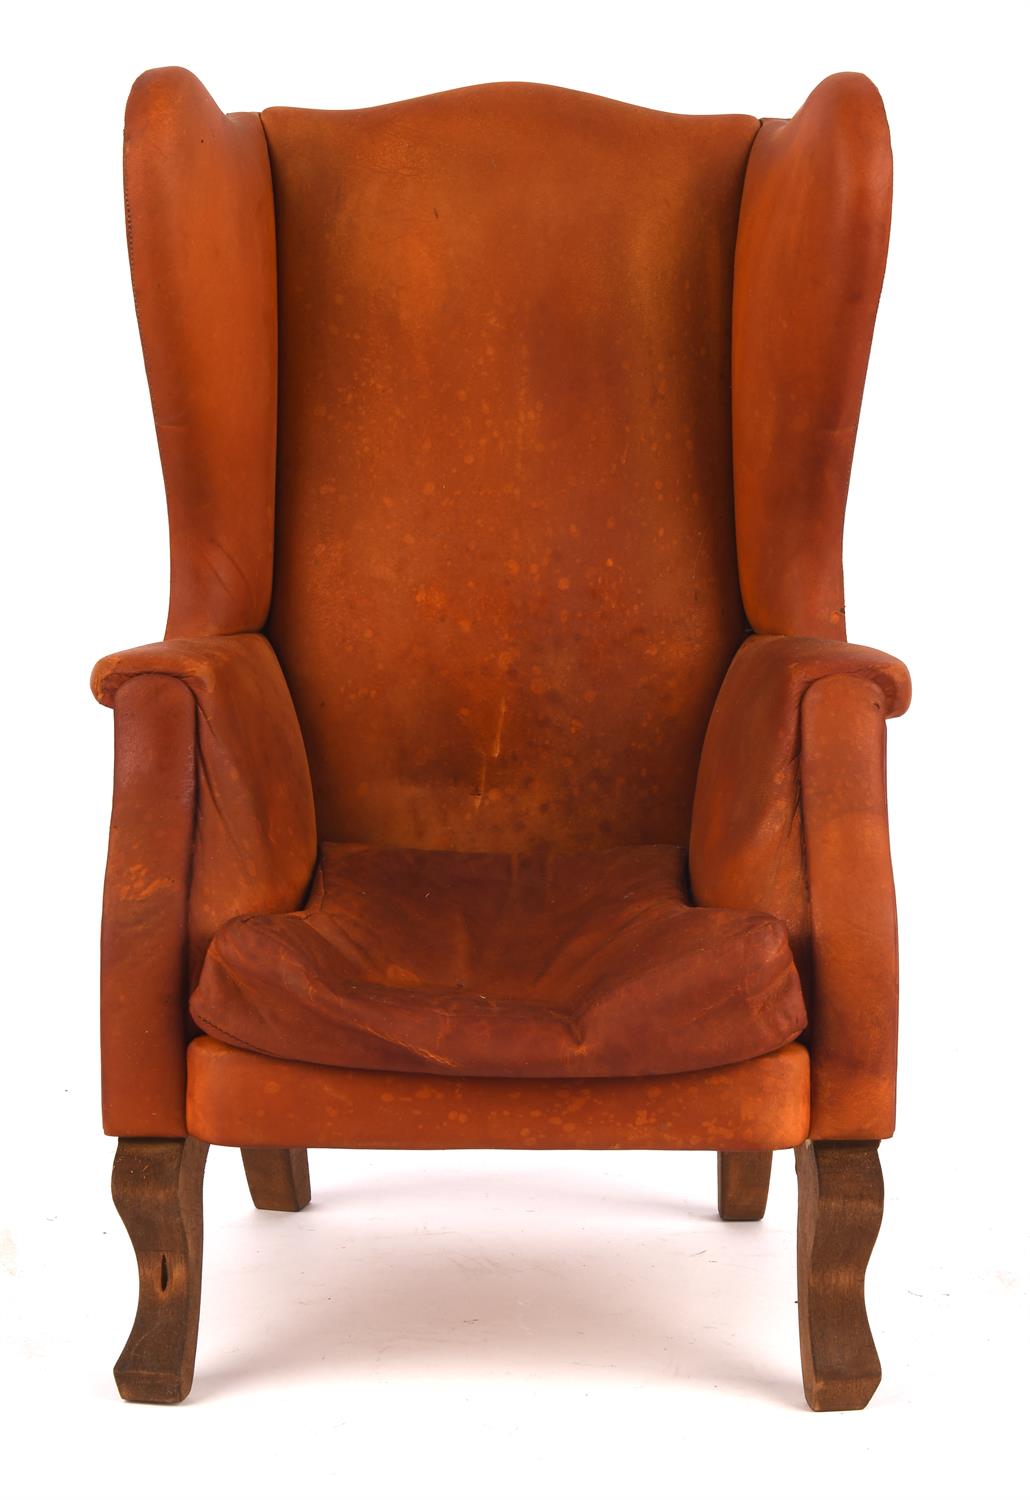 Gerry Anderson: The Secret Service (1969) - Original prop, tan leather wing-backed chair with - Image 3 of 3